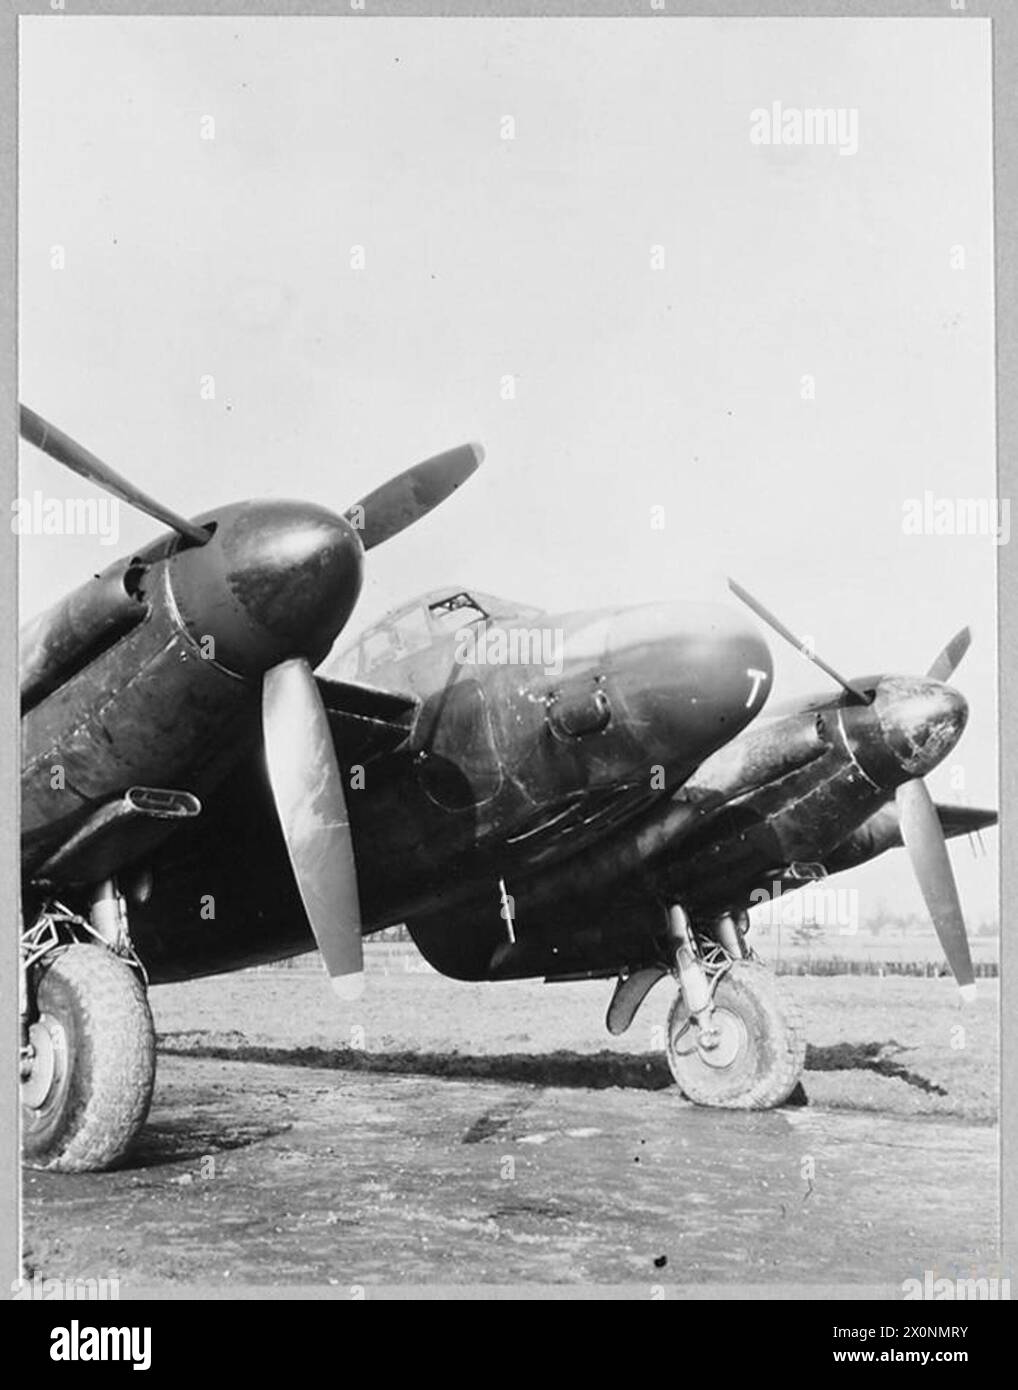 THE MOSQUITO MARK XIII NIGHTFIGHTER. - Picture issued 1945. emphasizes its distinguishing bull-like nose. Photographic negative , Royal Air Force Stock Photo